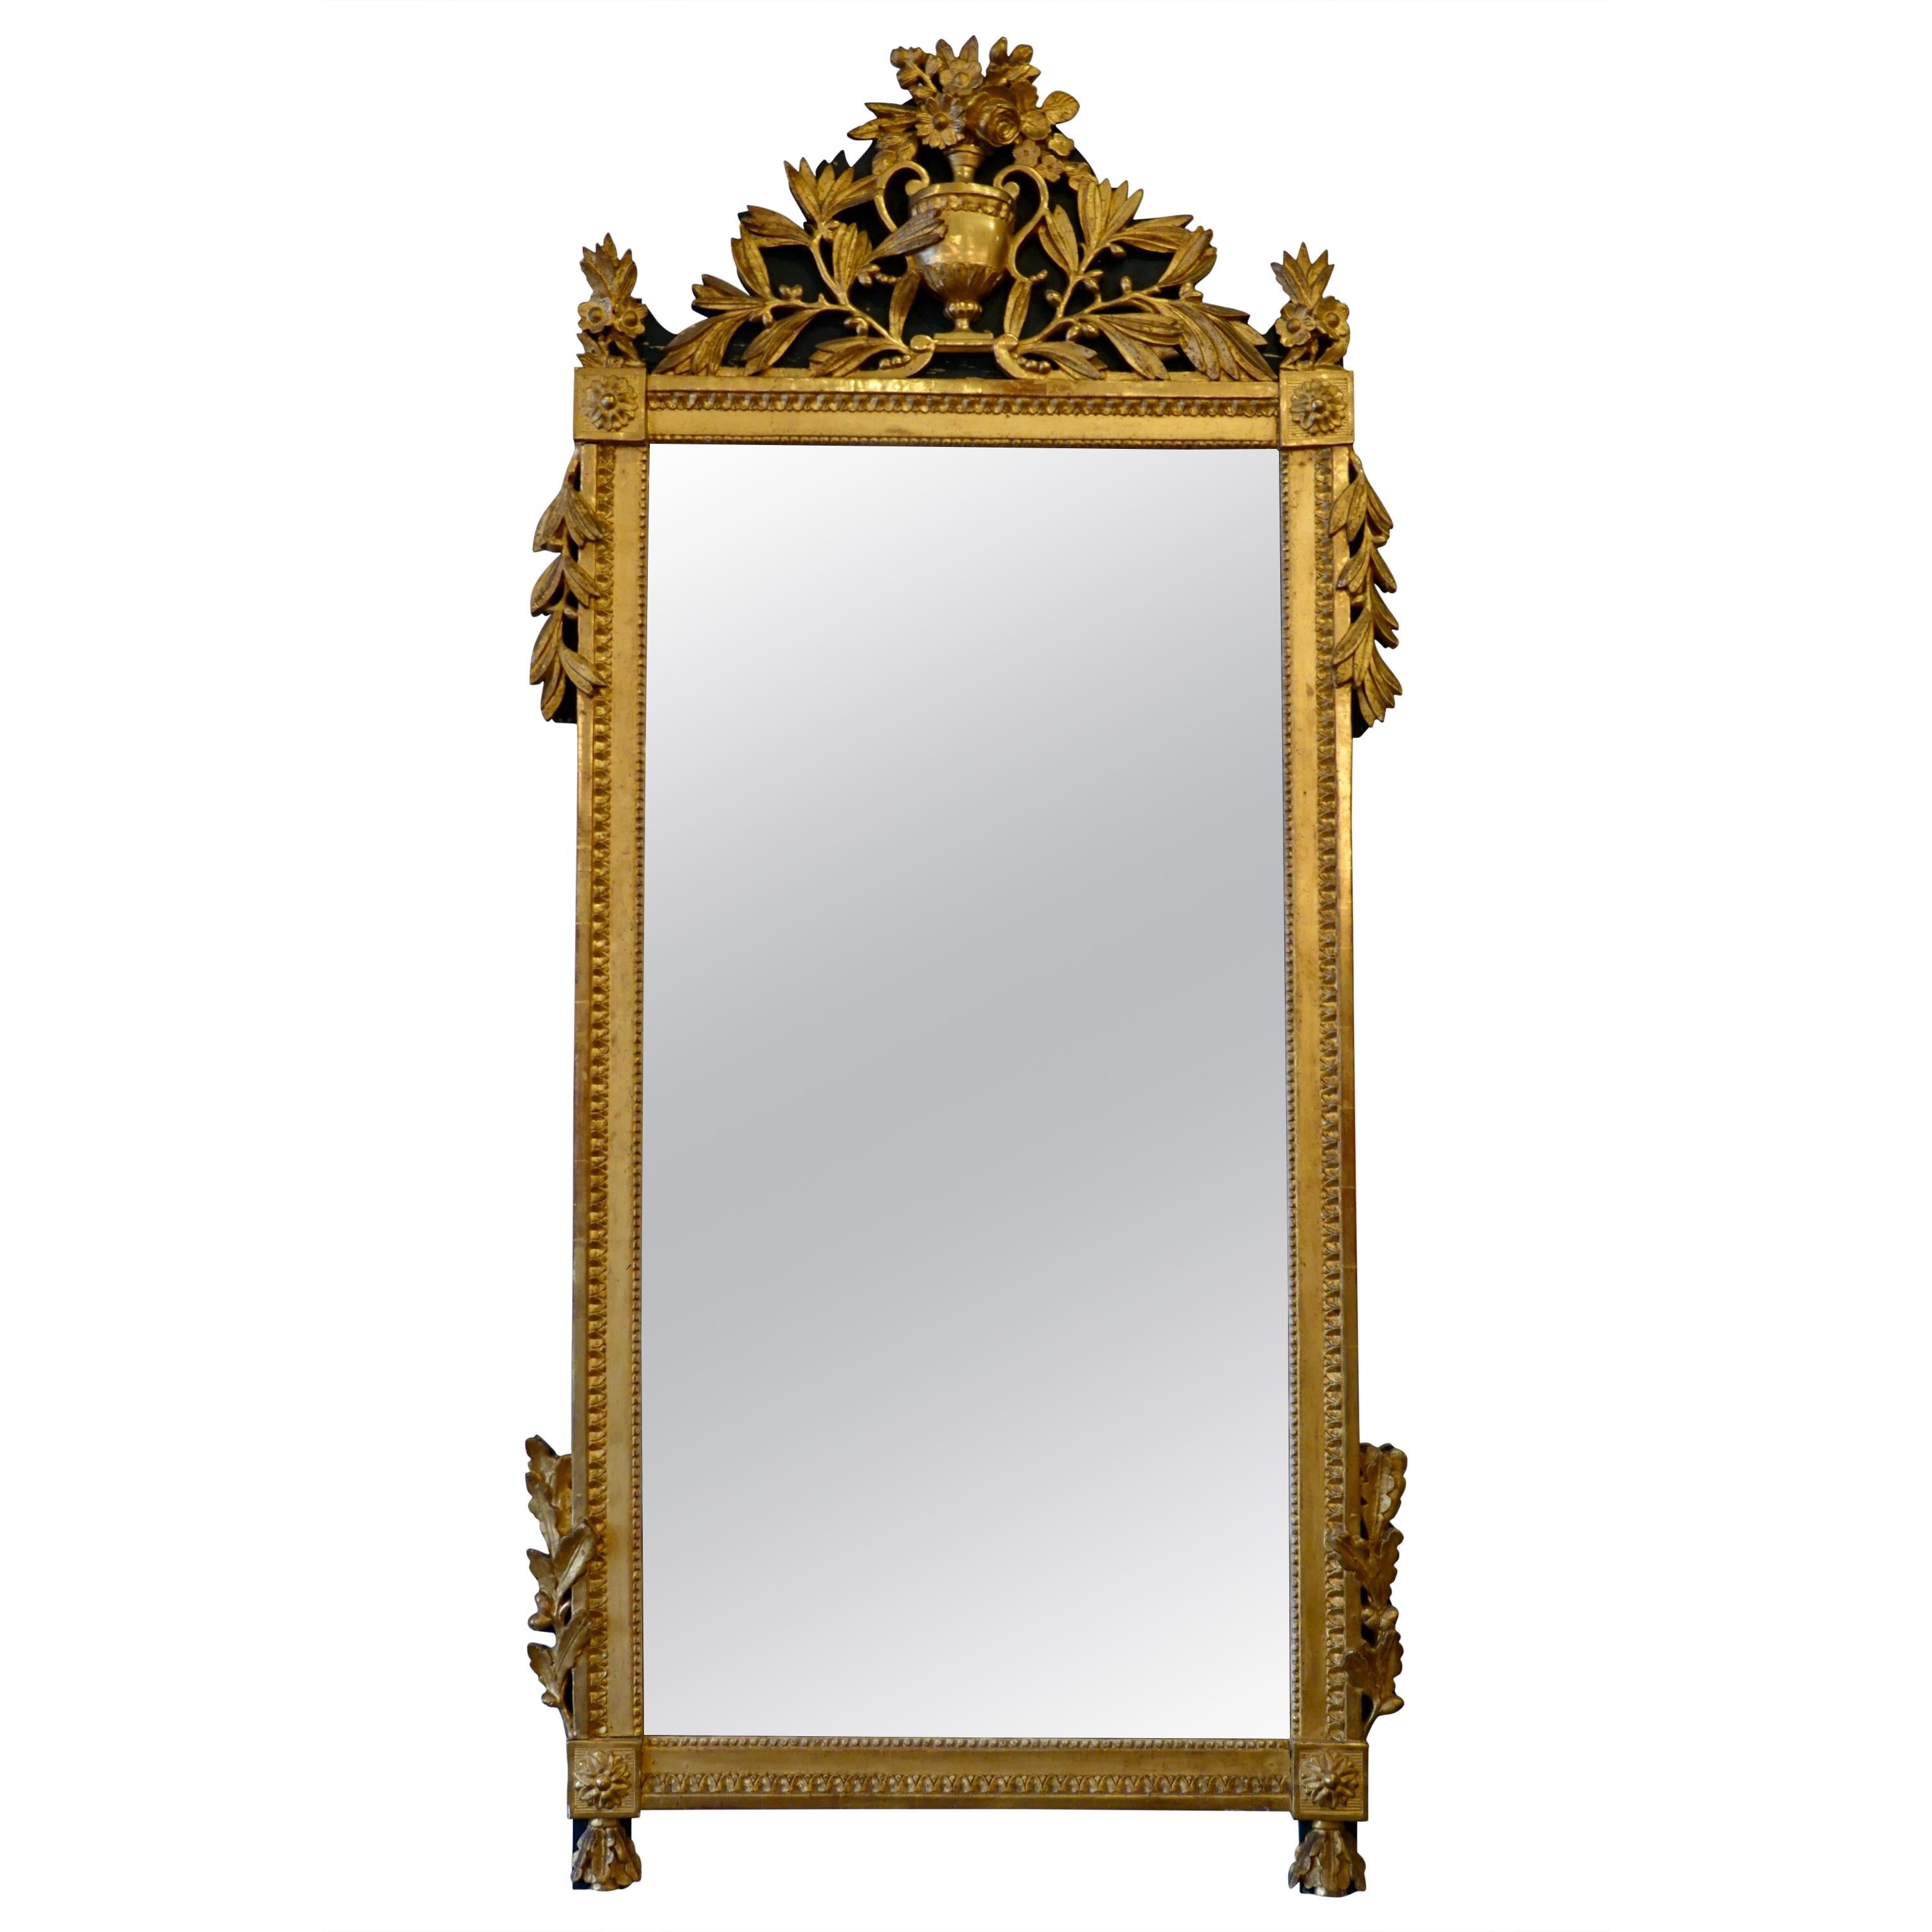 Louis XVI Period Giltwood Trumeau Mirror with Urn, Flowers and Laurel Leaves